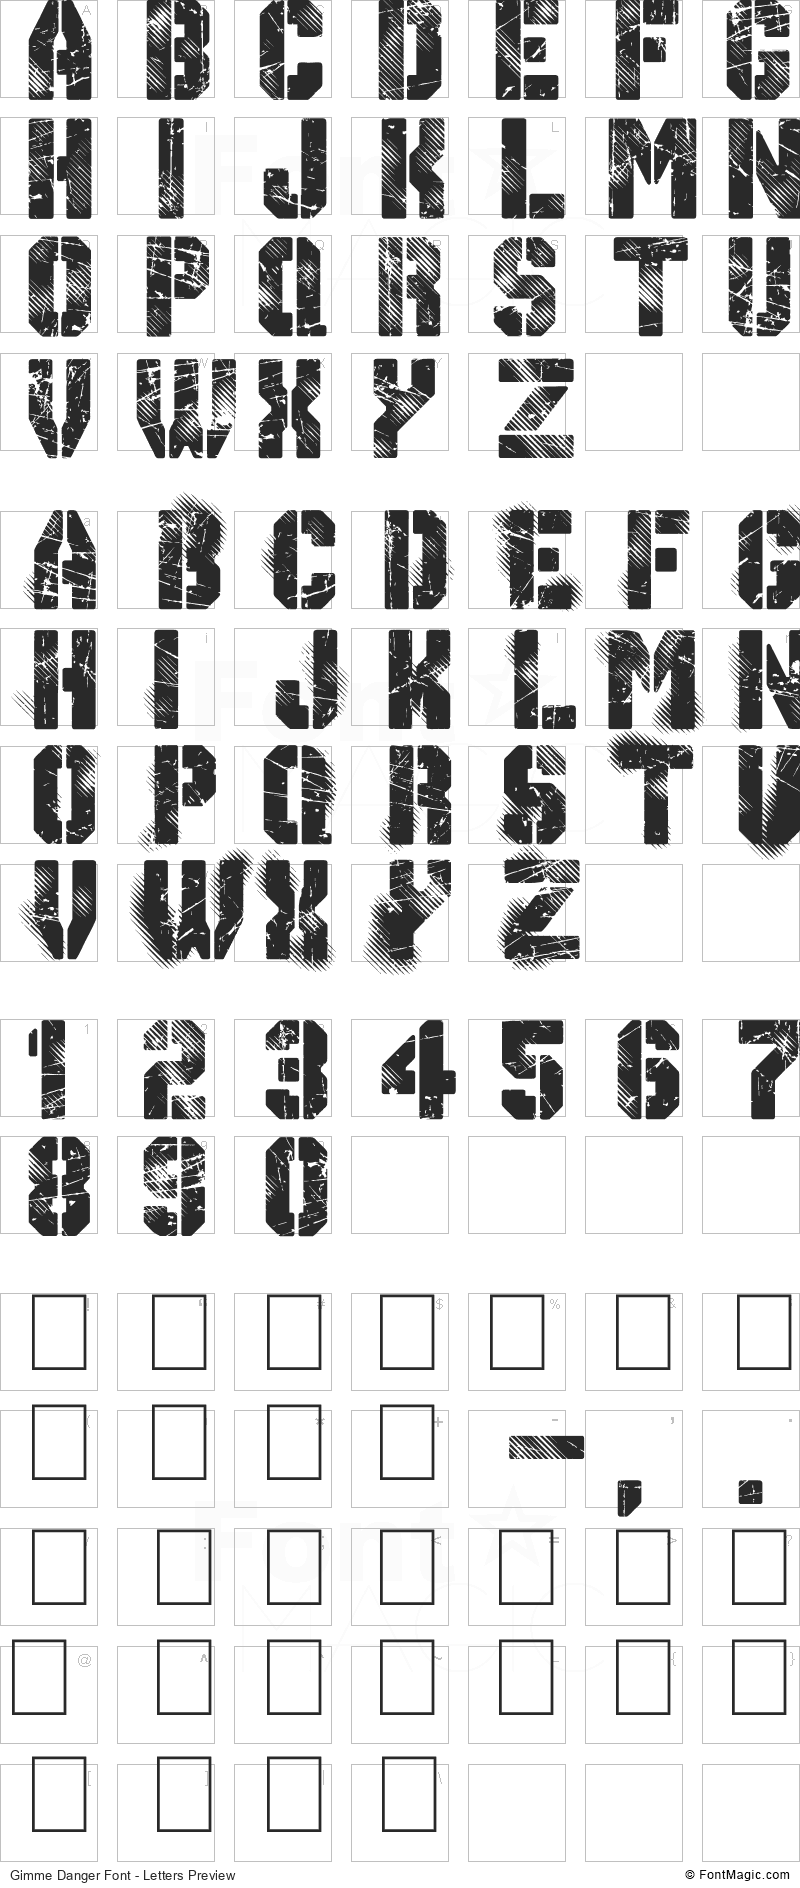 Gimme Danger Font - All Latters Preview Chart